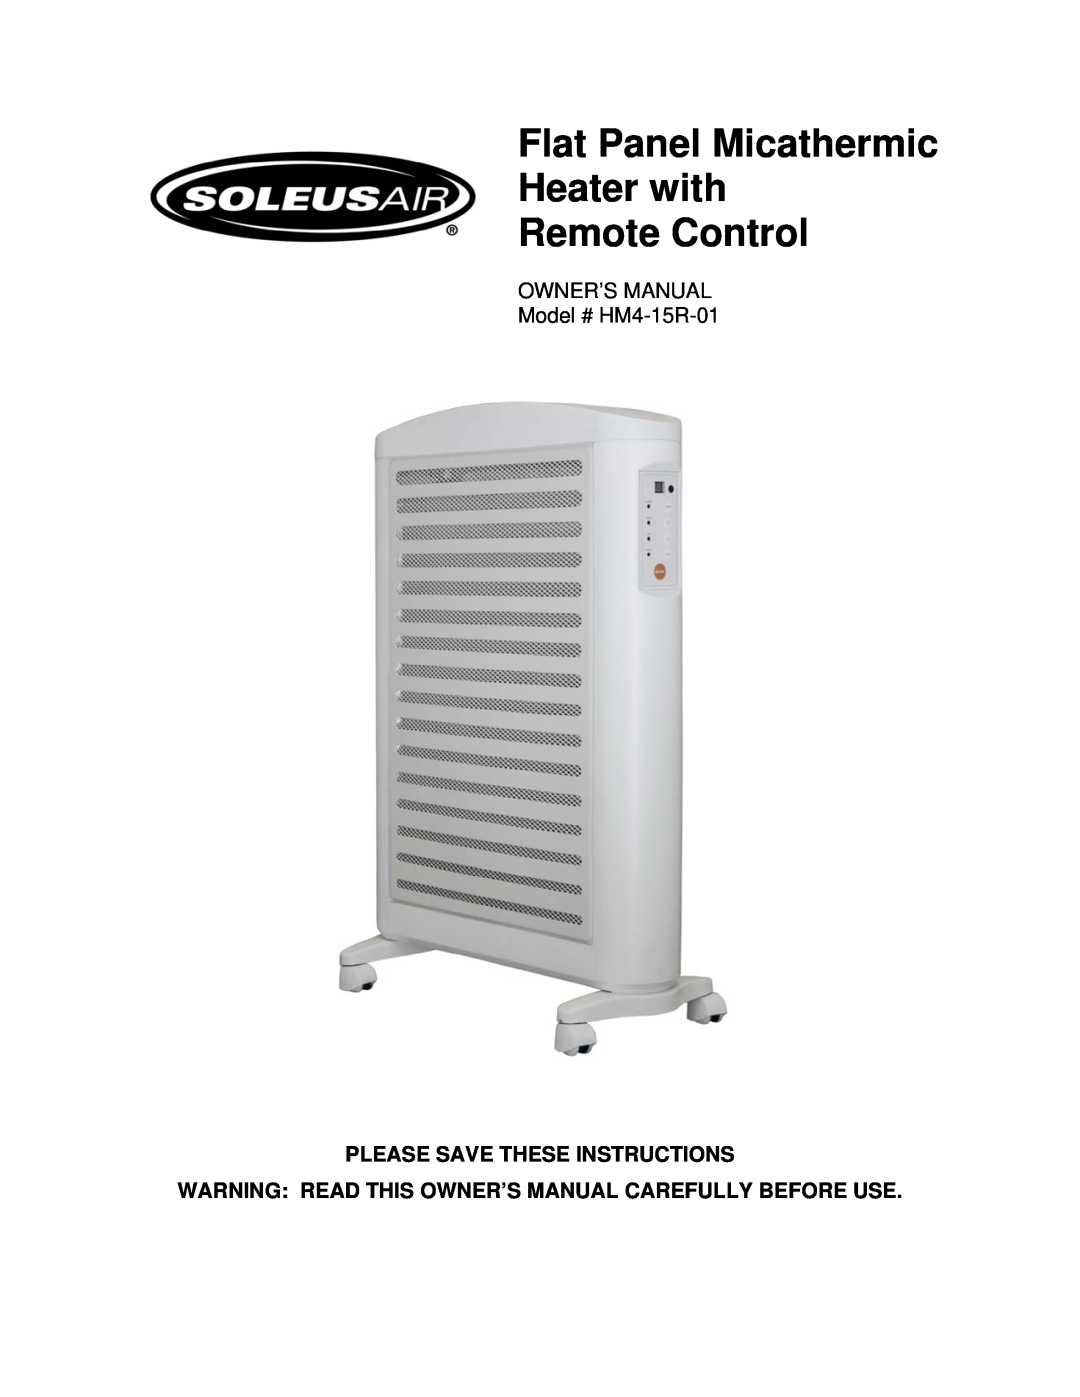 Soleus Air HM4-15R-01 owner manual Flat Panel Micathermic Heater with Remote Control, Please Save These Instructions 